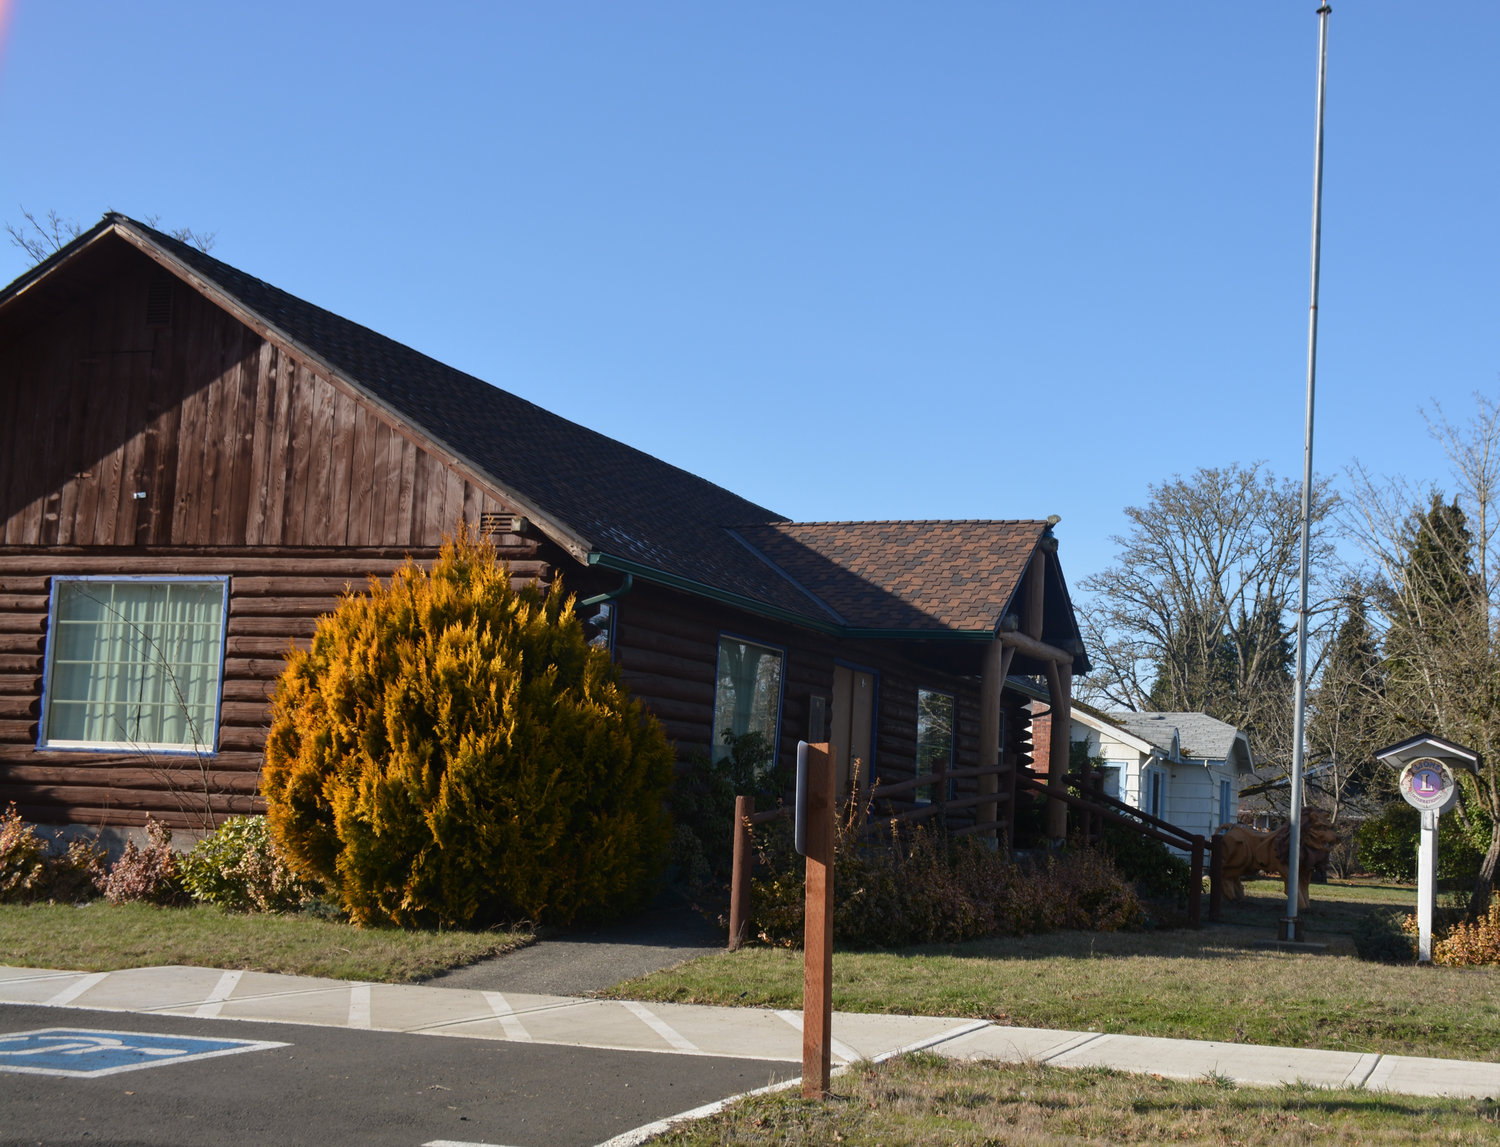 The Yelm Lions Club is located at 301 W Yelm Ave.